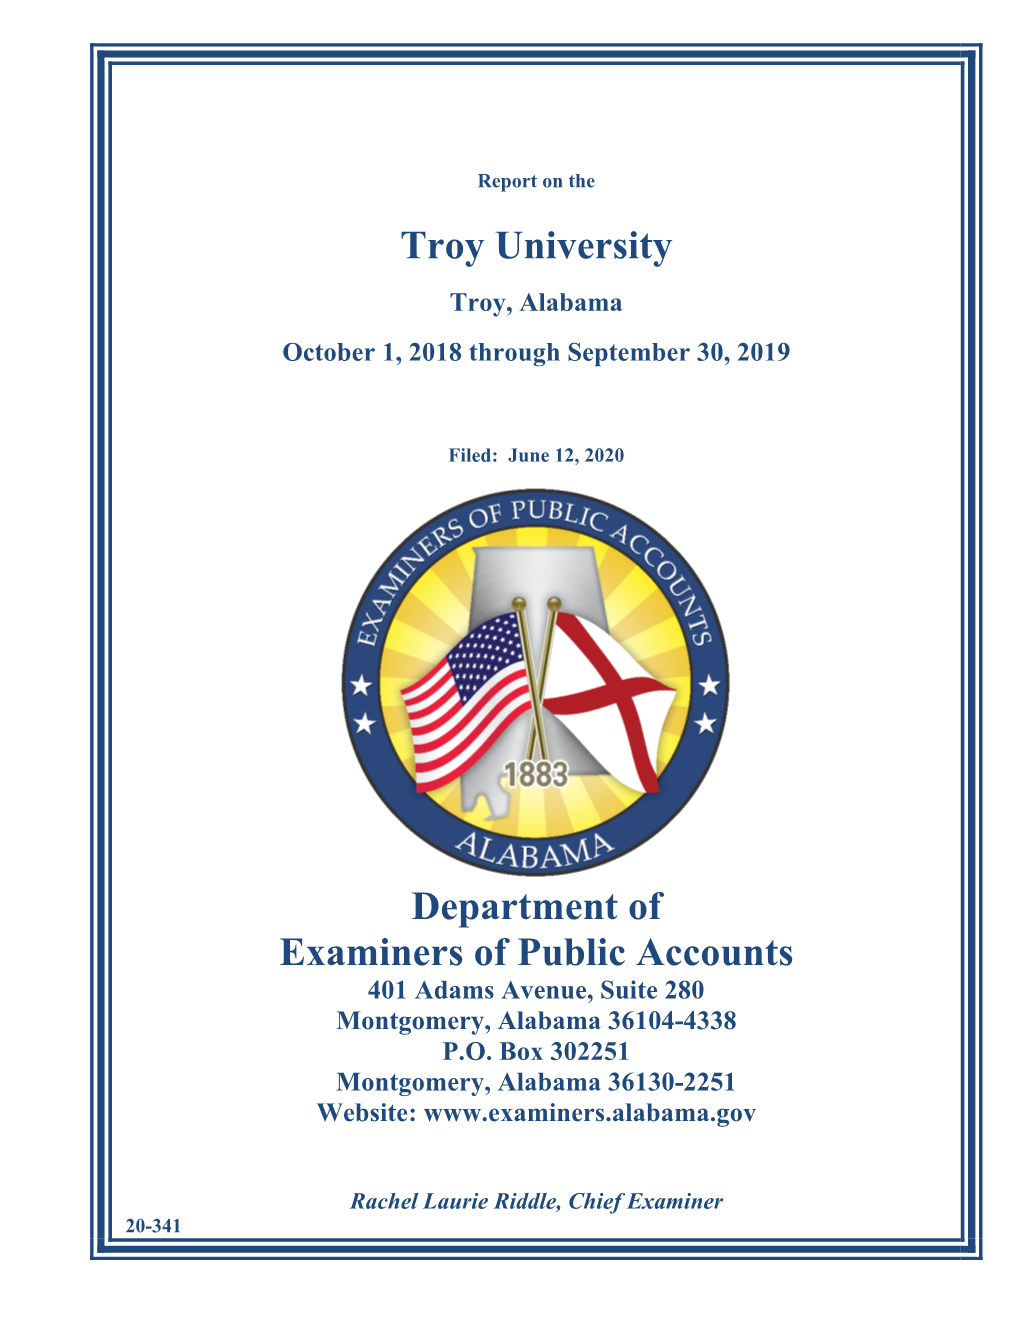 Troy University Department of Examiners of Public Accounts